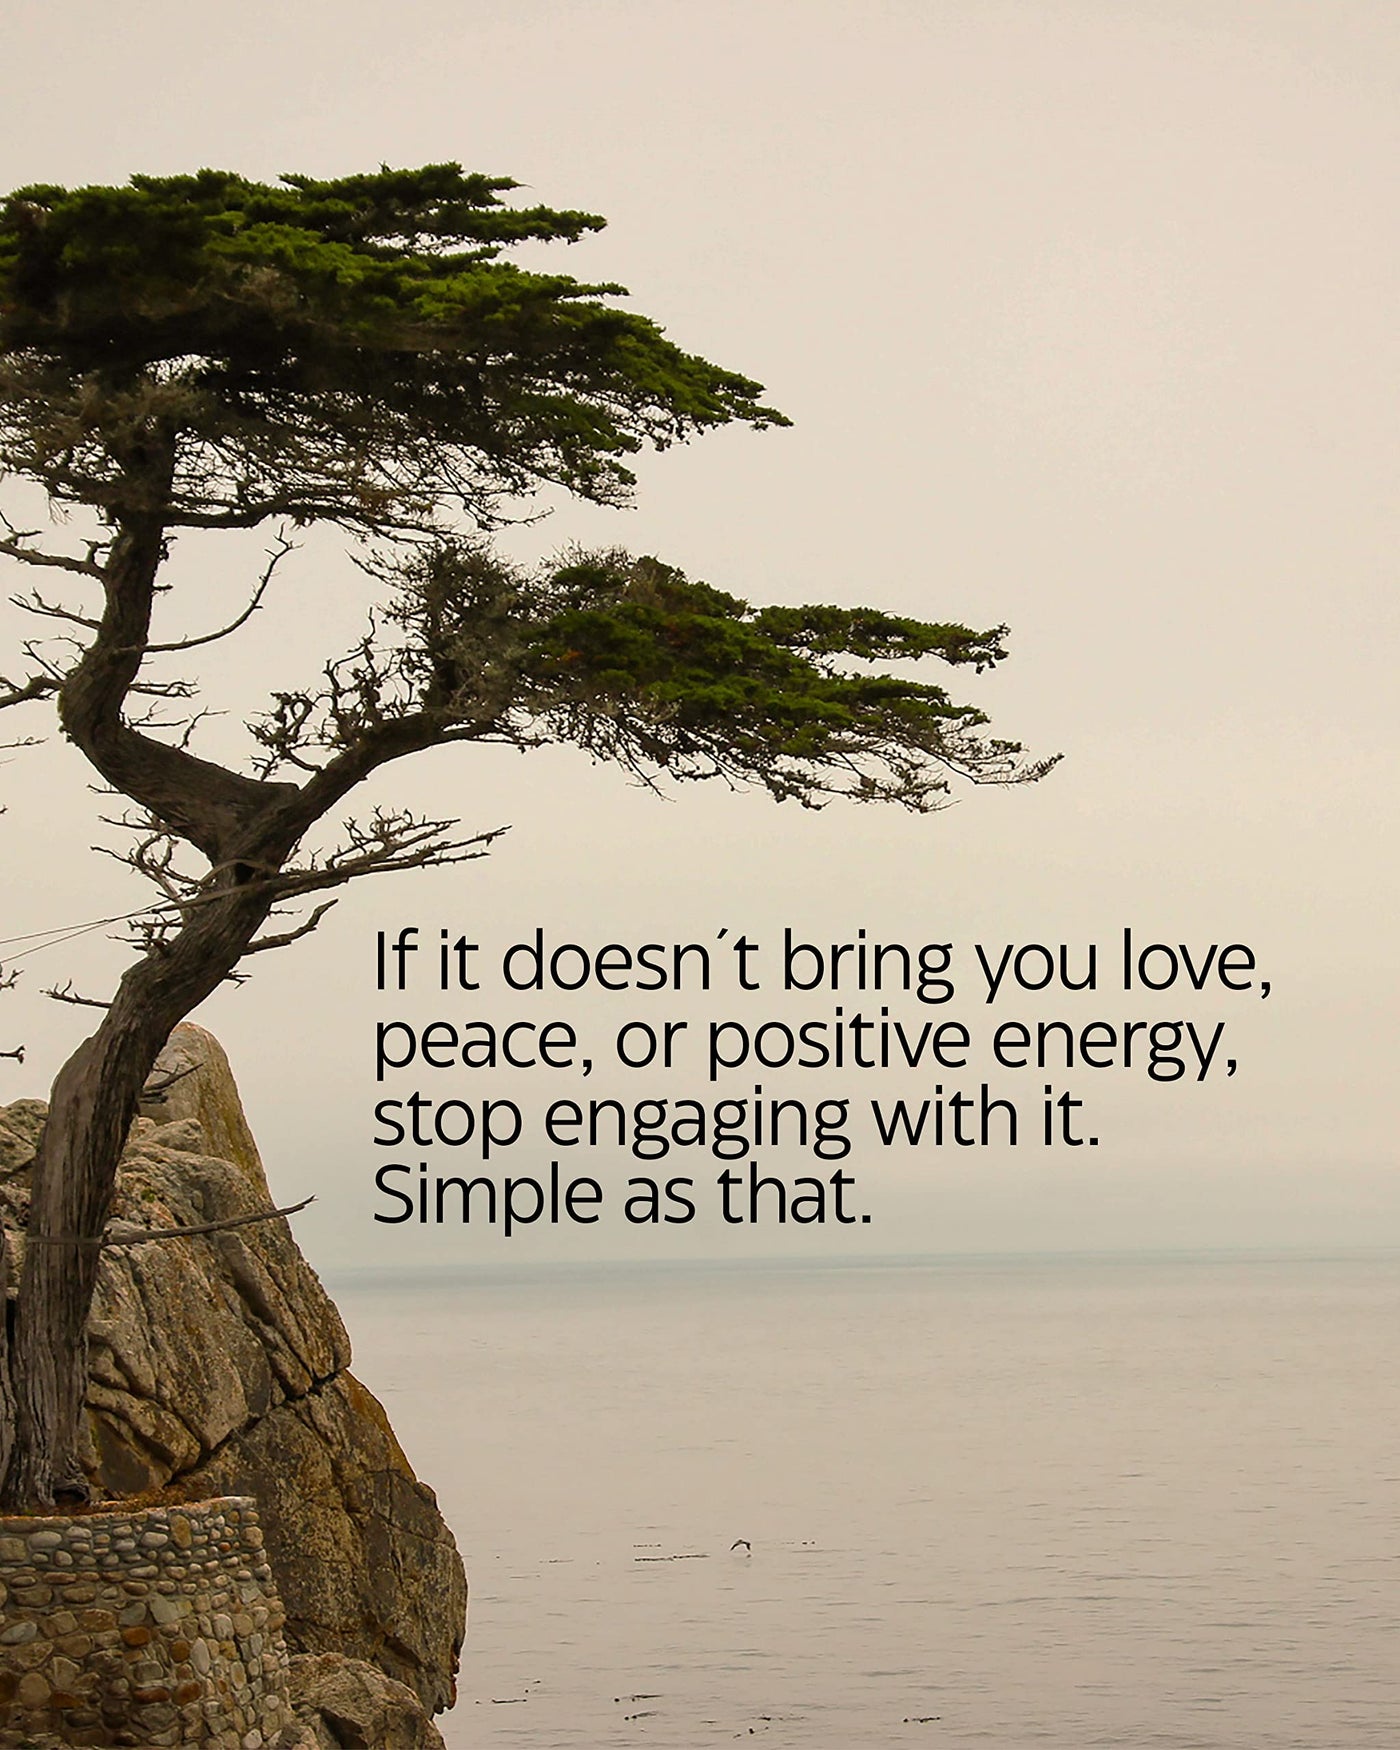 Doesn't Bring You Love or Peace-Stop Engaging With It Inspirational Quotes Wall Art -8x10" Motivational Tree Print-Ready to Frame. Positive Home-Office-School-Dorm Decor. Great Gift of Inspiration!